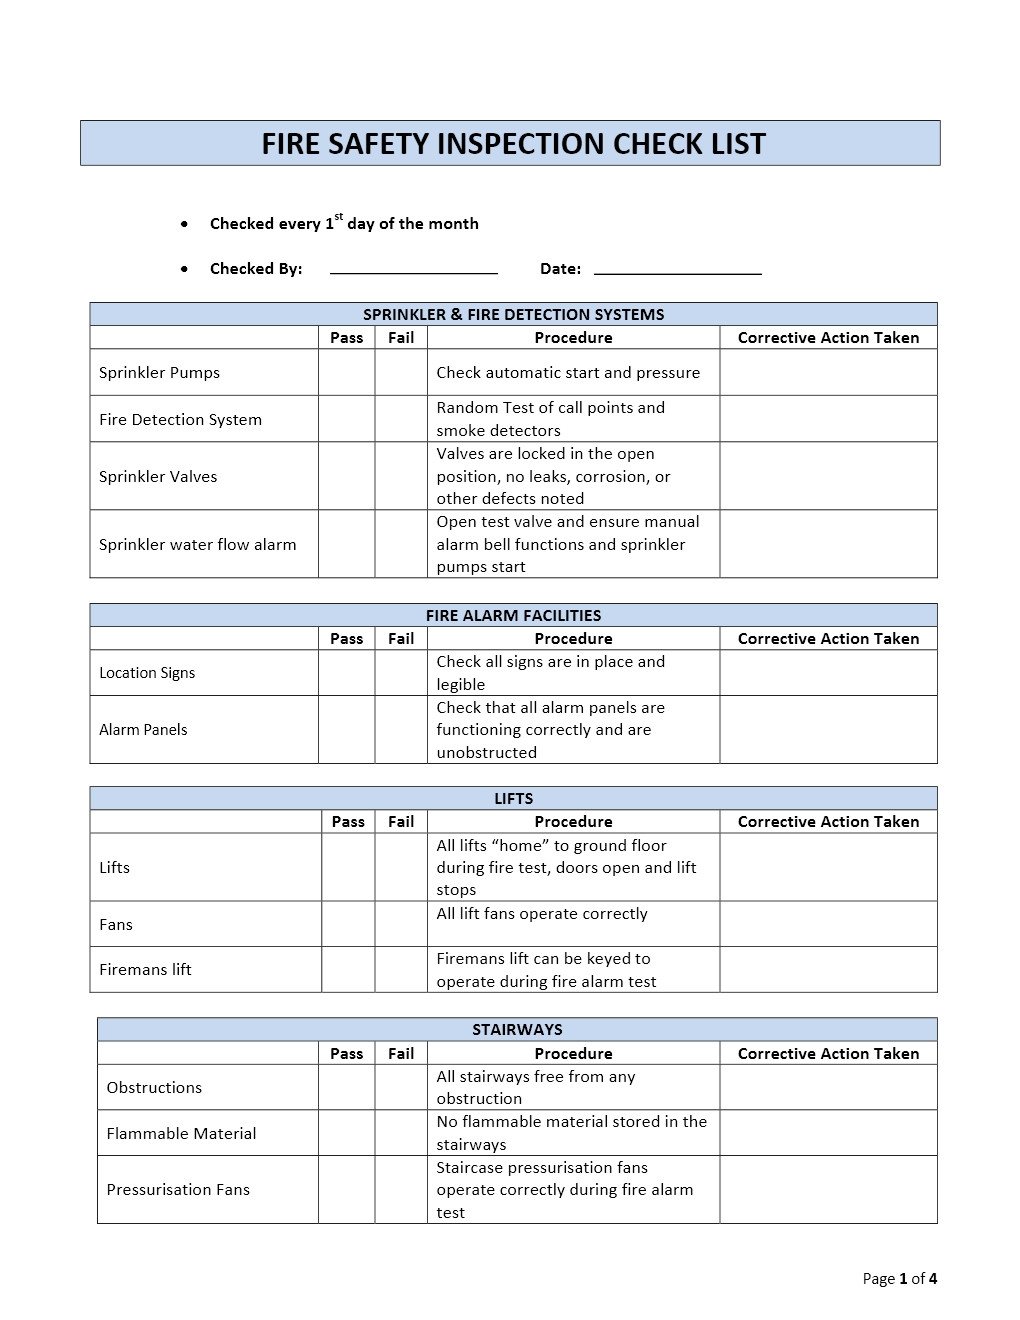 Home Inspection Checklist Templates Fire Safety Inspection Checklist